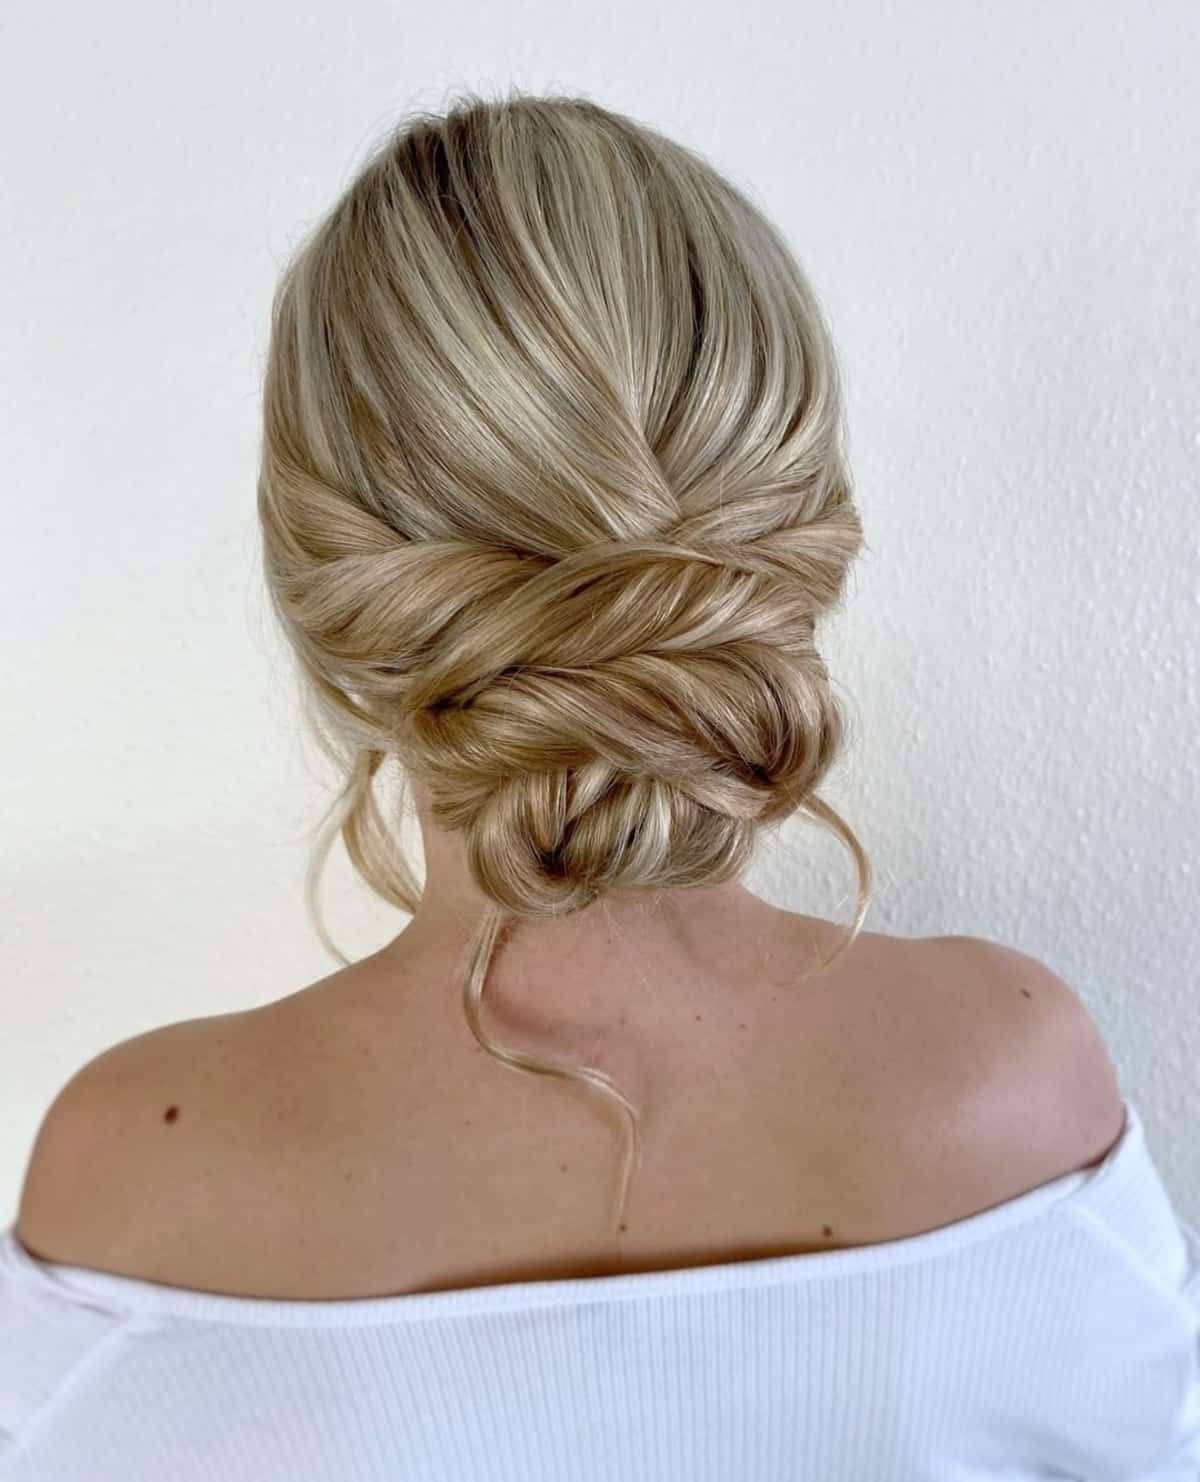 33 Gorgeous Bridesmaid Hairstyles for The Brides Big Day